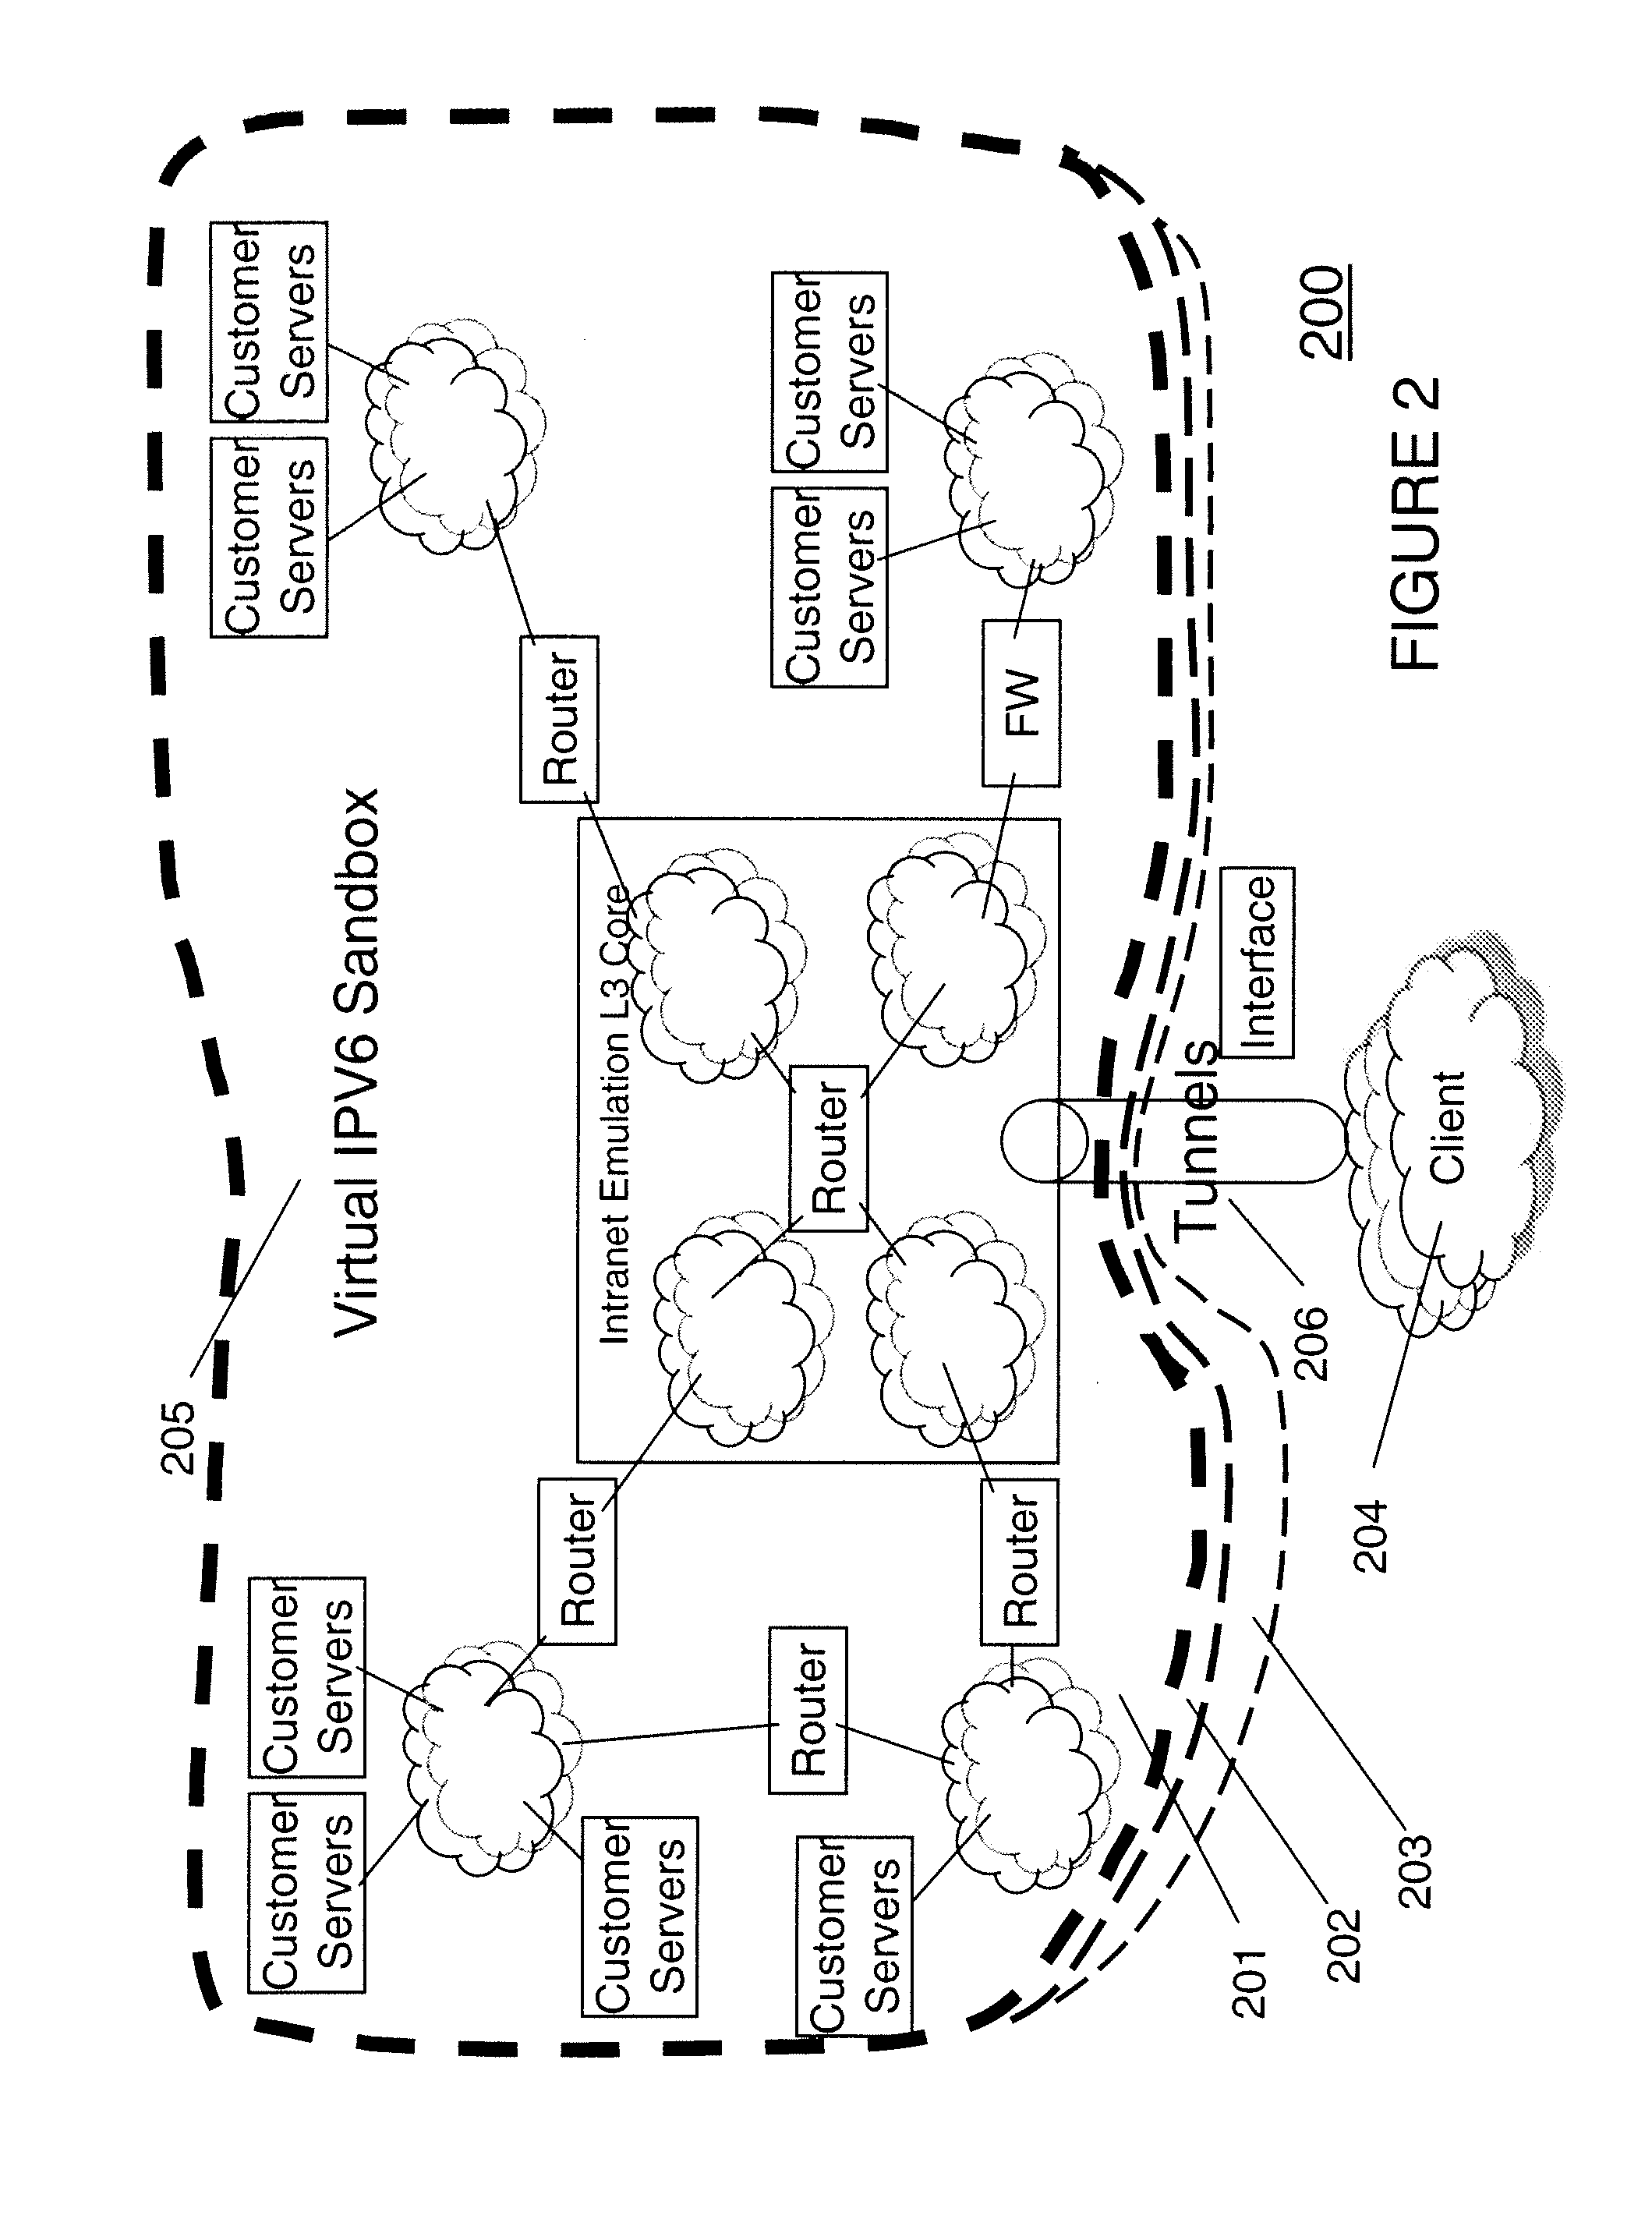 Method and apparatus for providing a test network as an IP accessible cloud service